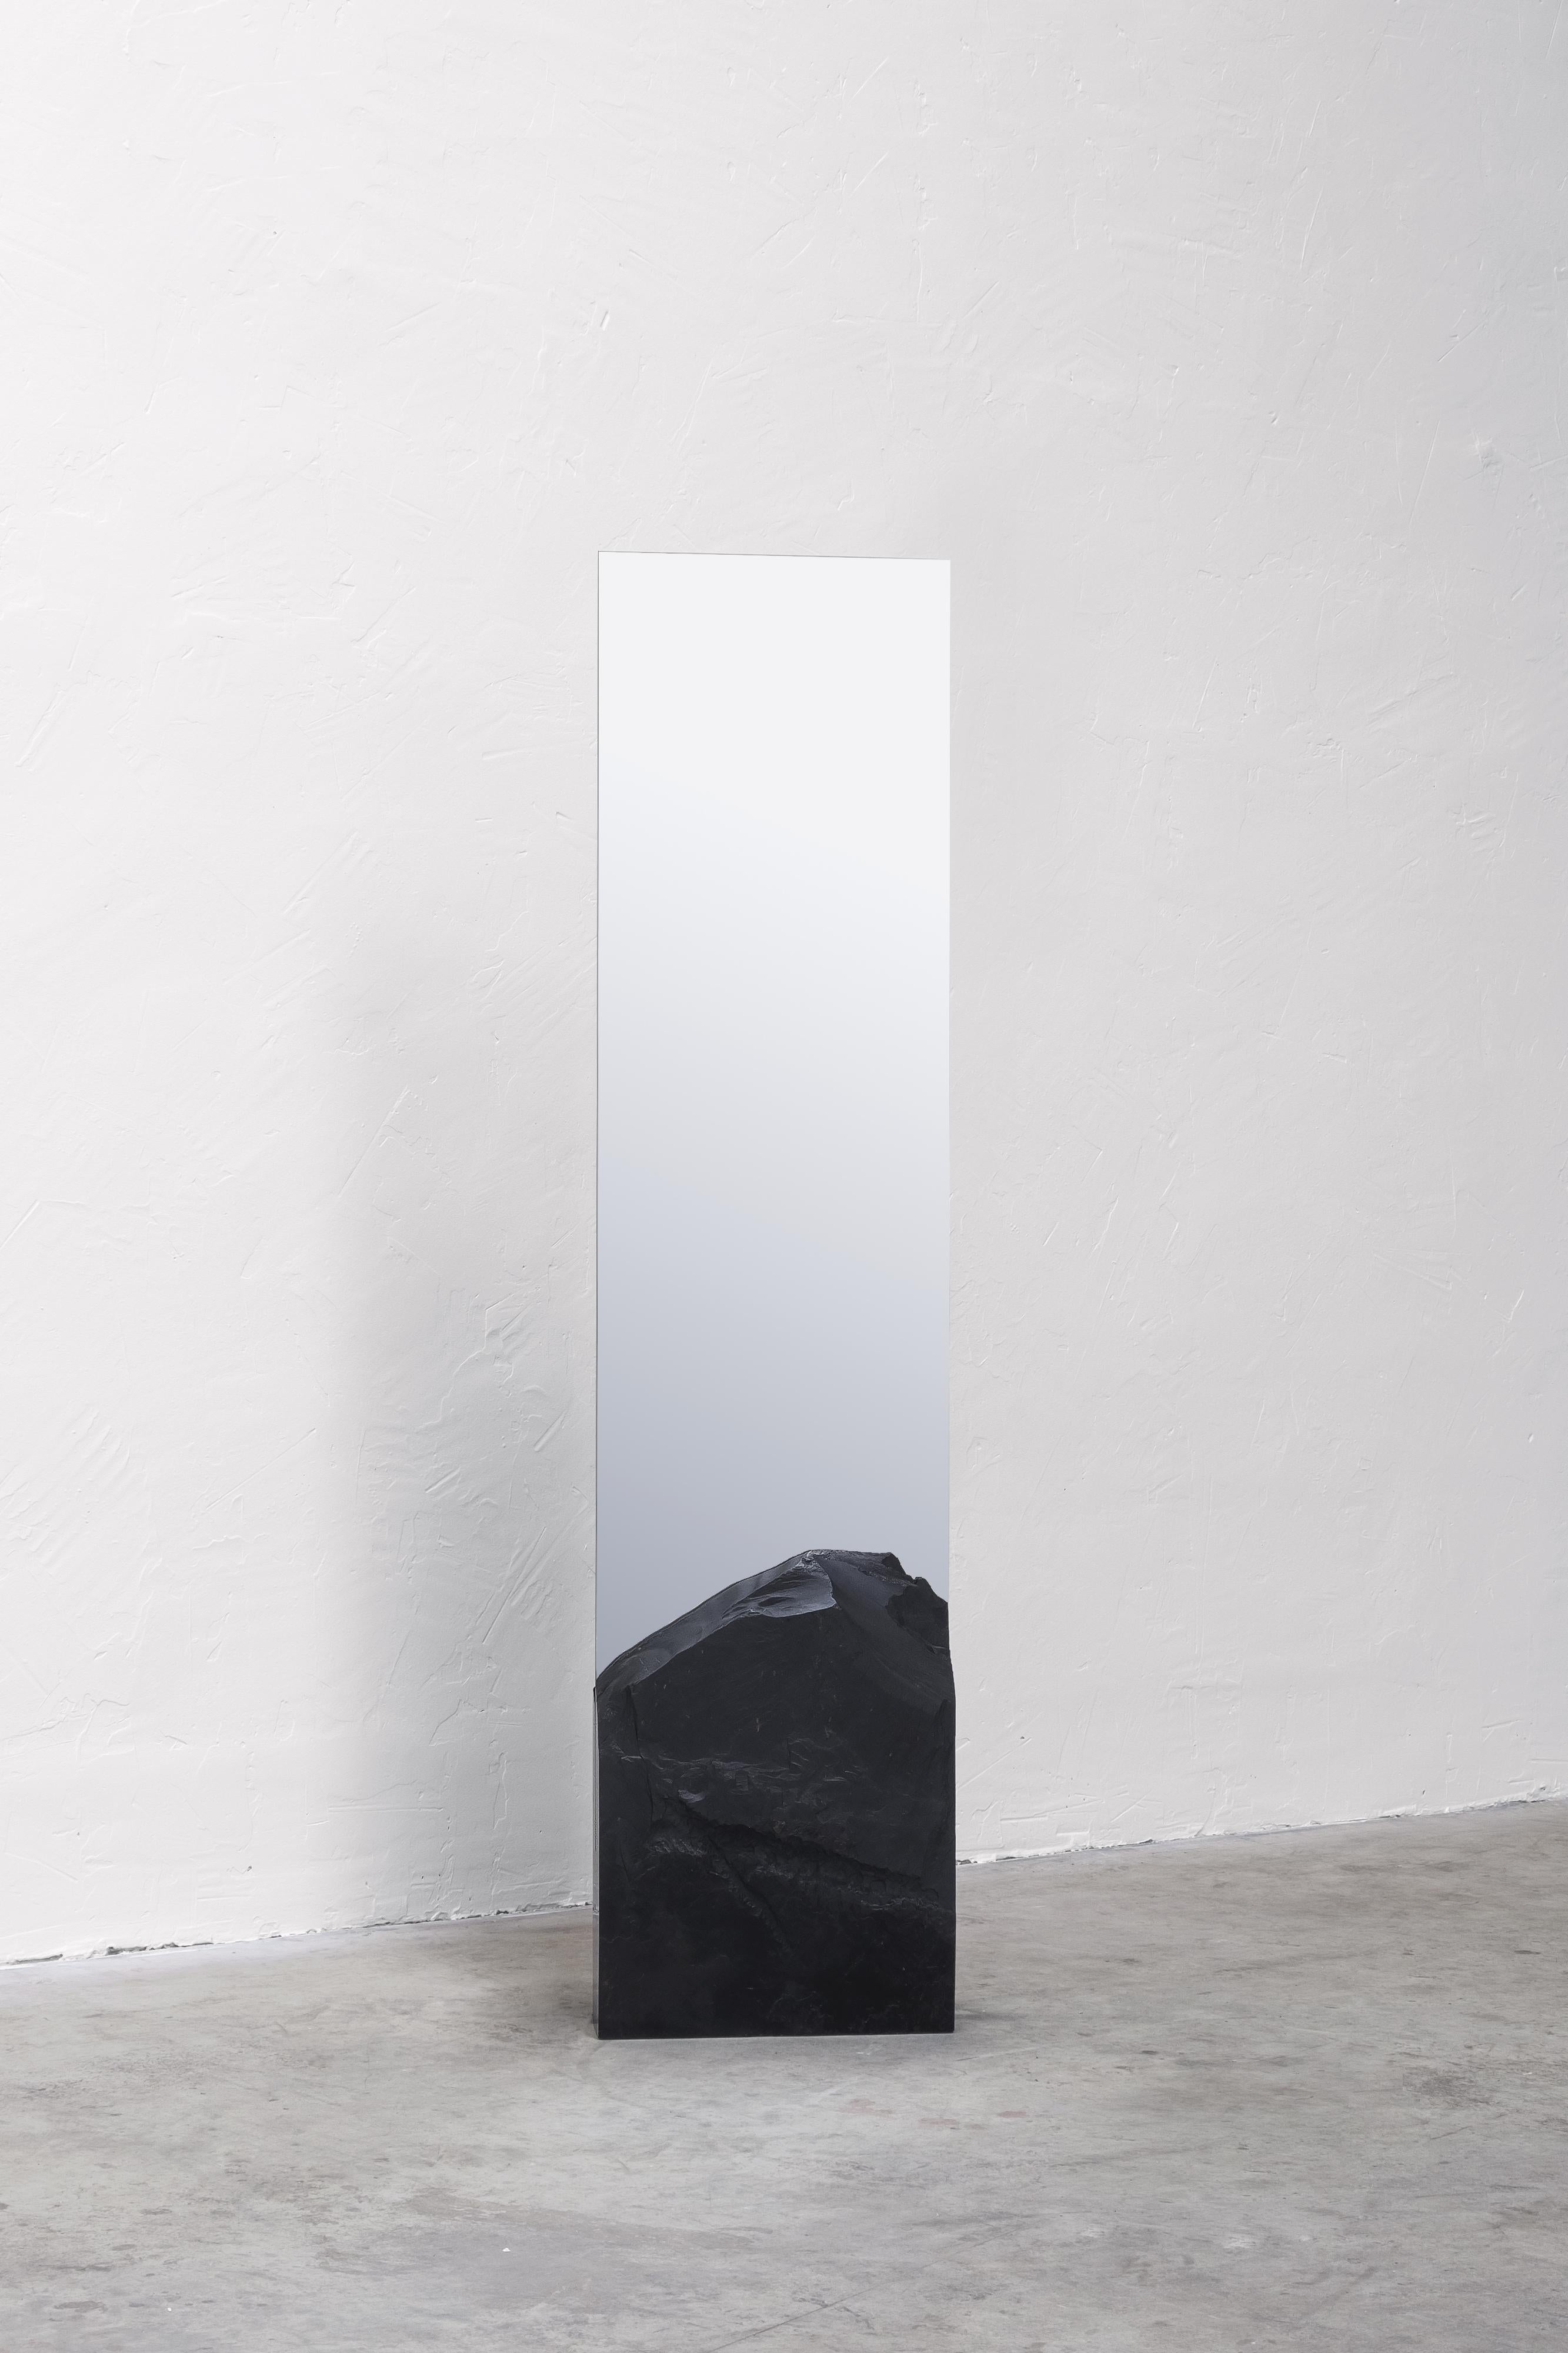 Farouche Mirror by Frédéric Saulou 
Mirror with a black slate base, 2020

Dimensions: H.200 x 45 x 16 cm

“Domestiquer” (Domesticate) is a project that aims to reintegrate heritage with the author’s design process, fuelled by encounters of creative